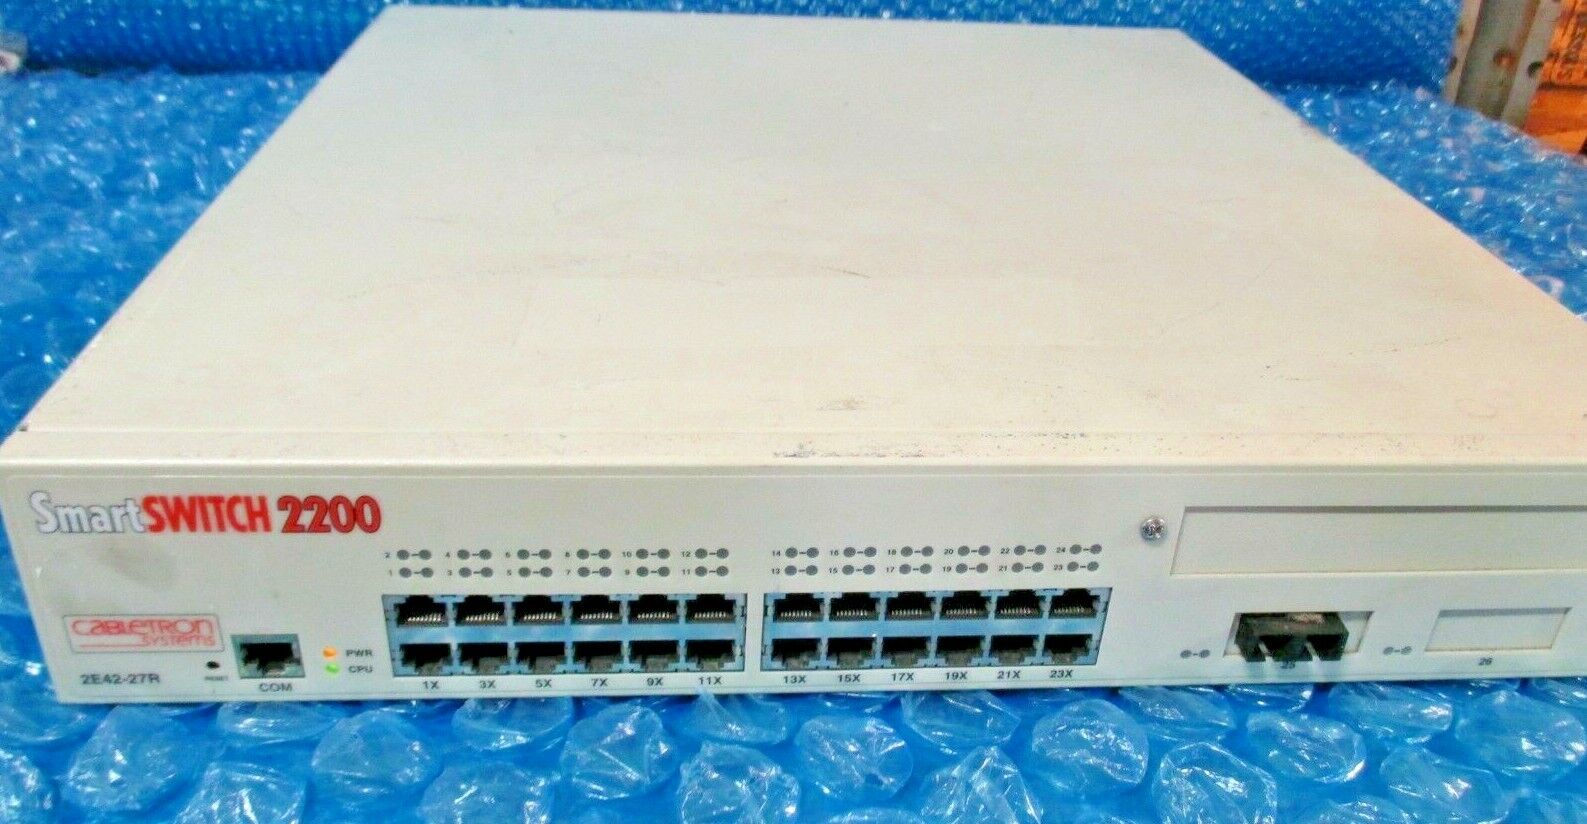 Smart Switch 2200 Cabletron Systems Model 2E42-27R